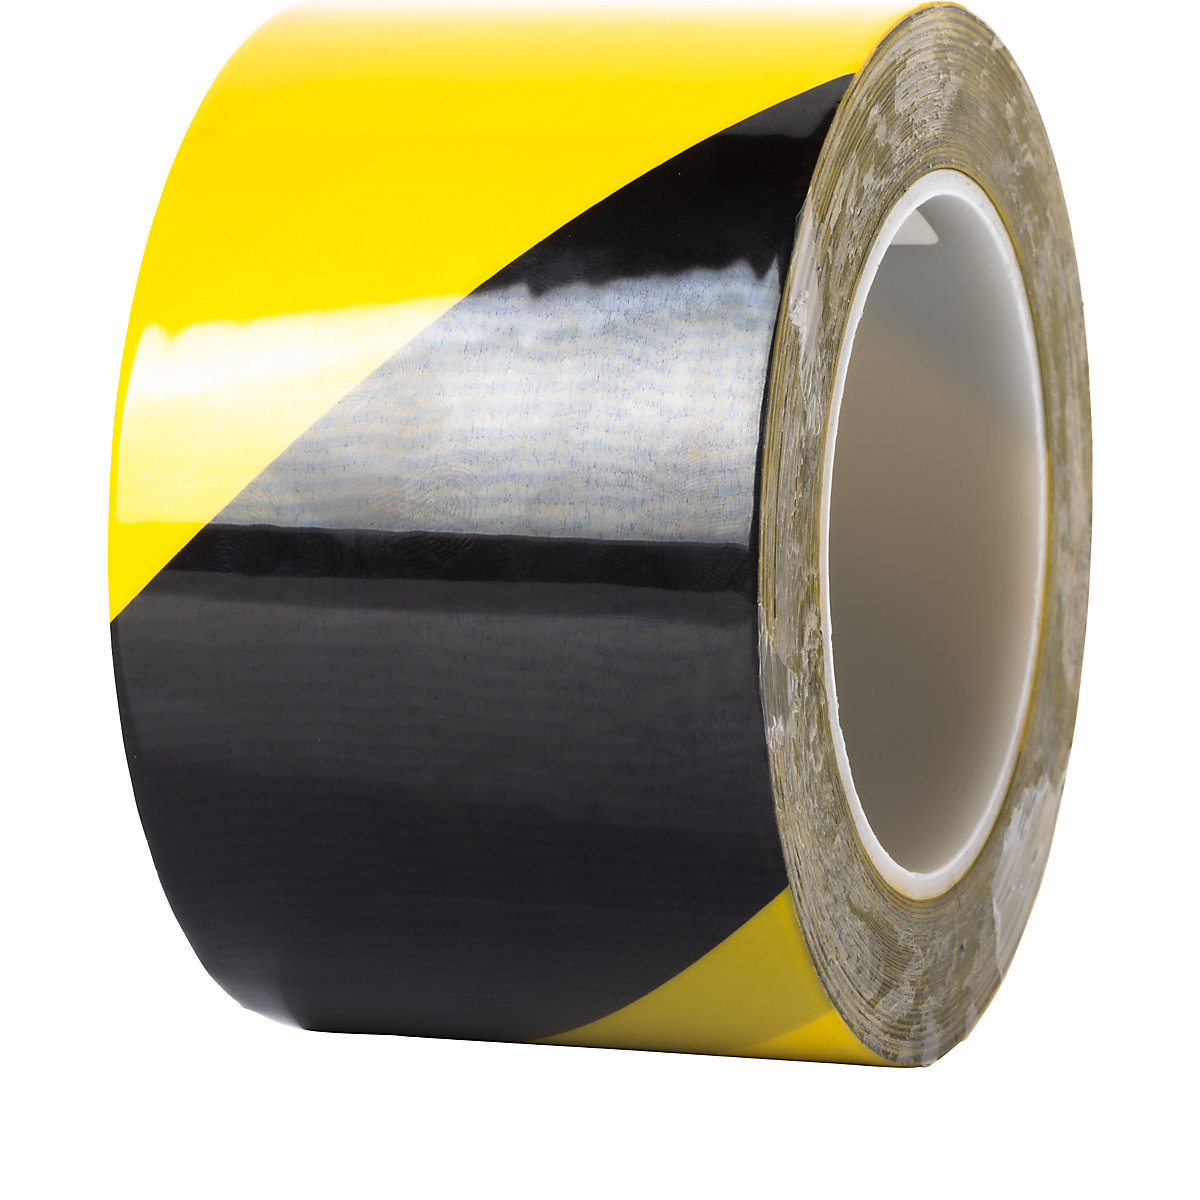 Floor marking tape, extra strong – Ampere, width 75 mm, thickness 0.2 mm, yellow/black-2